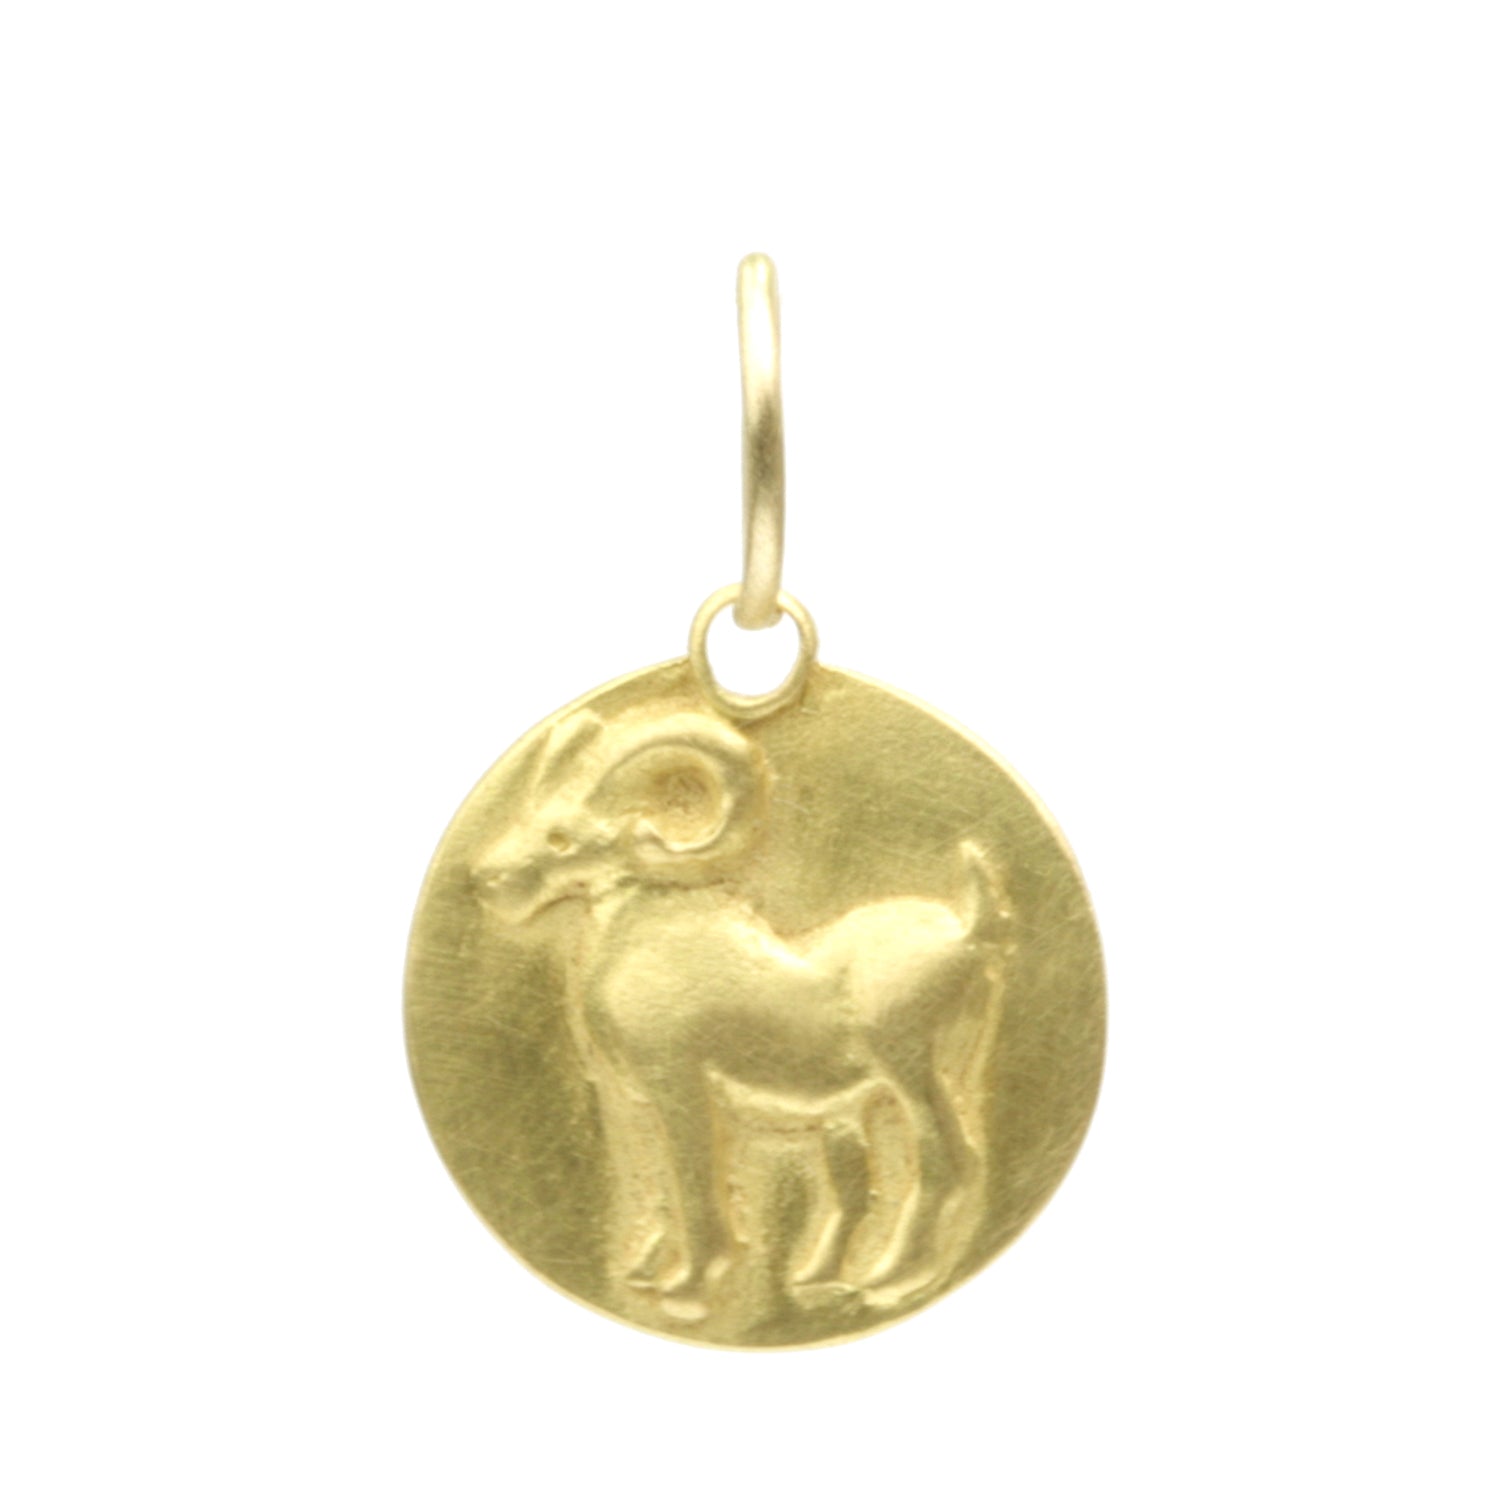 Aries Medal charm with large bale